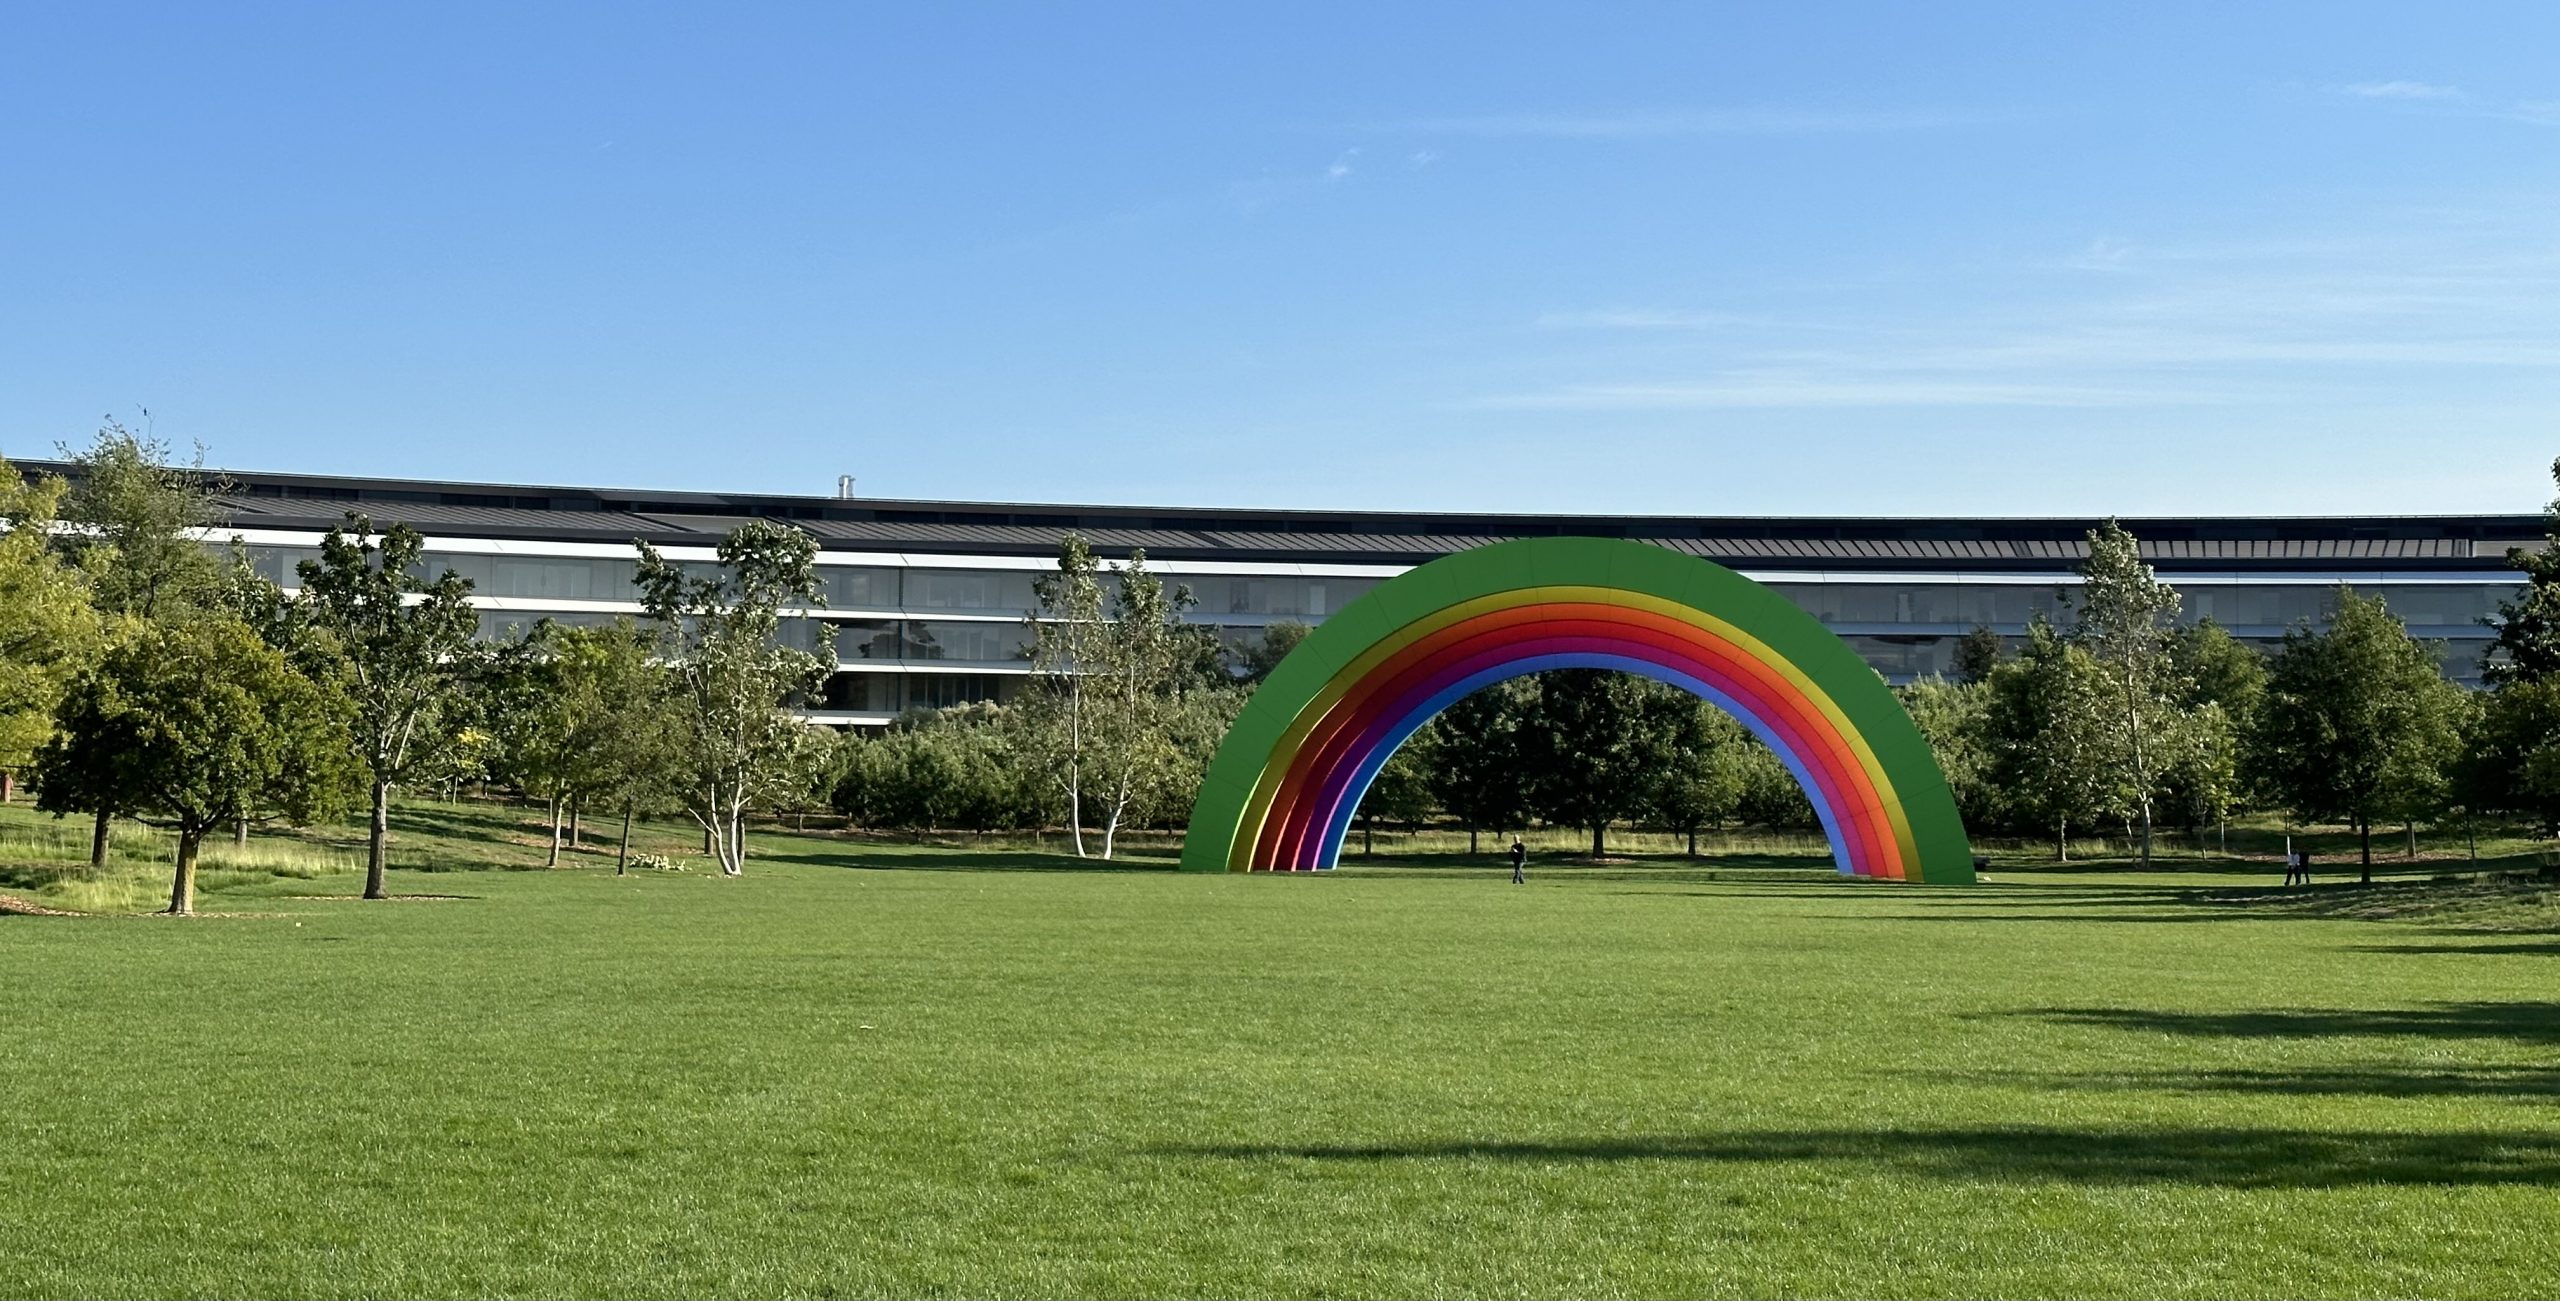 Photograph of the rainbow arches in the center of Apple Park